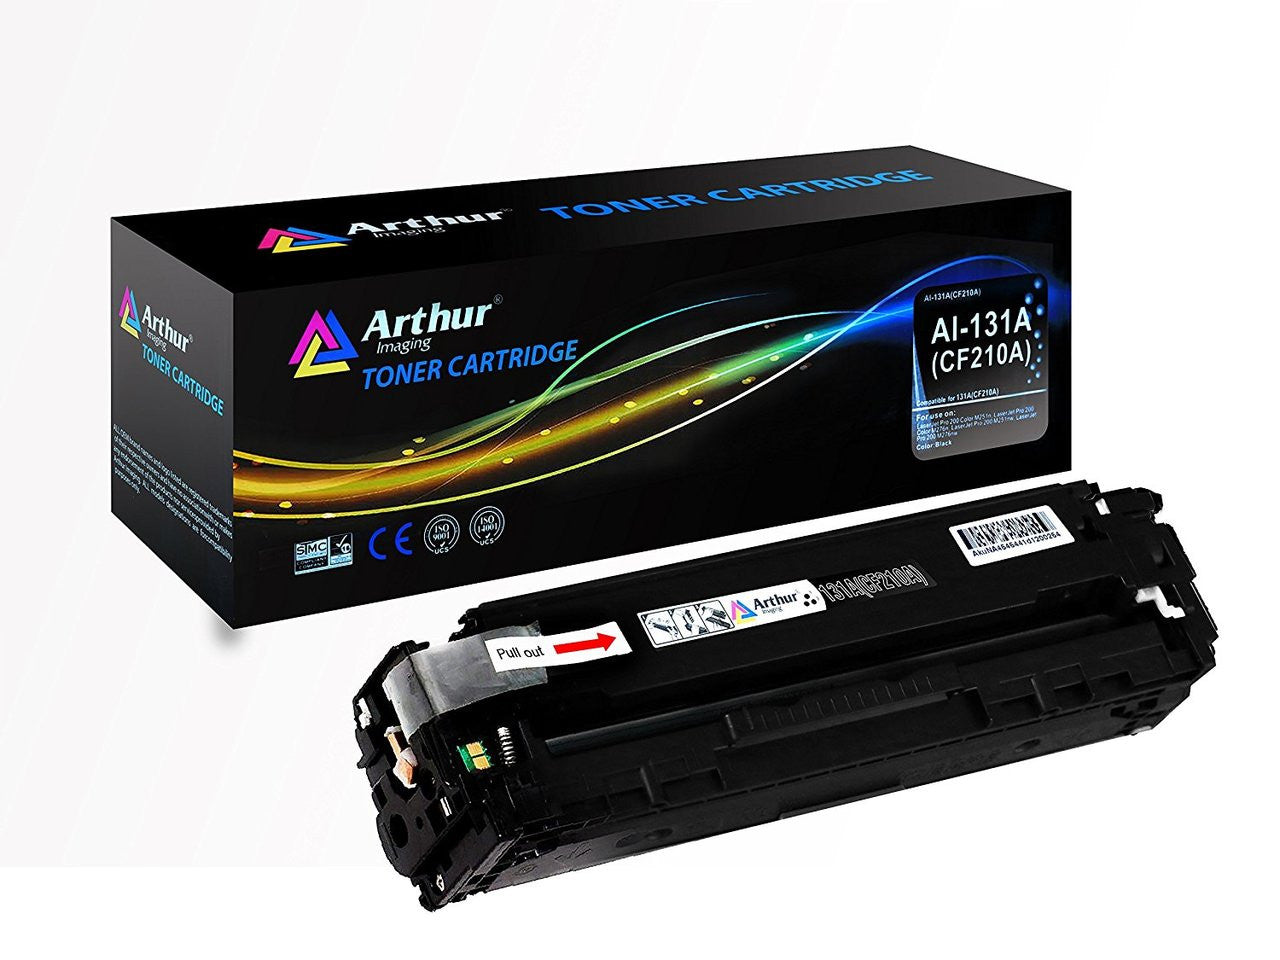 Arthur Imaging Compatible Toner Cartridge Replacement for HP 131A(CF210A) (Black, 1-Pack)